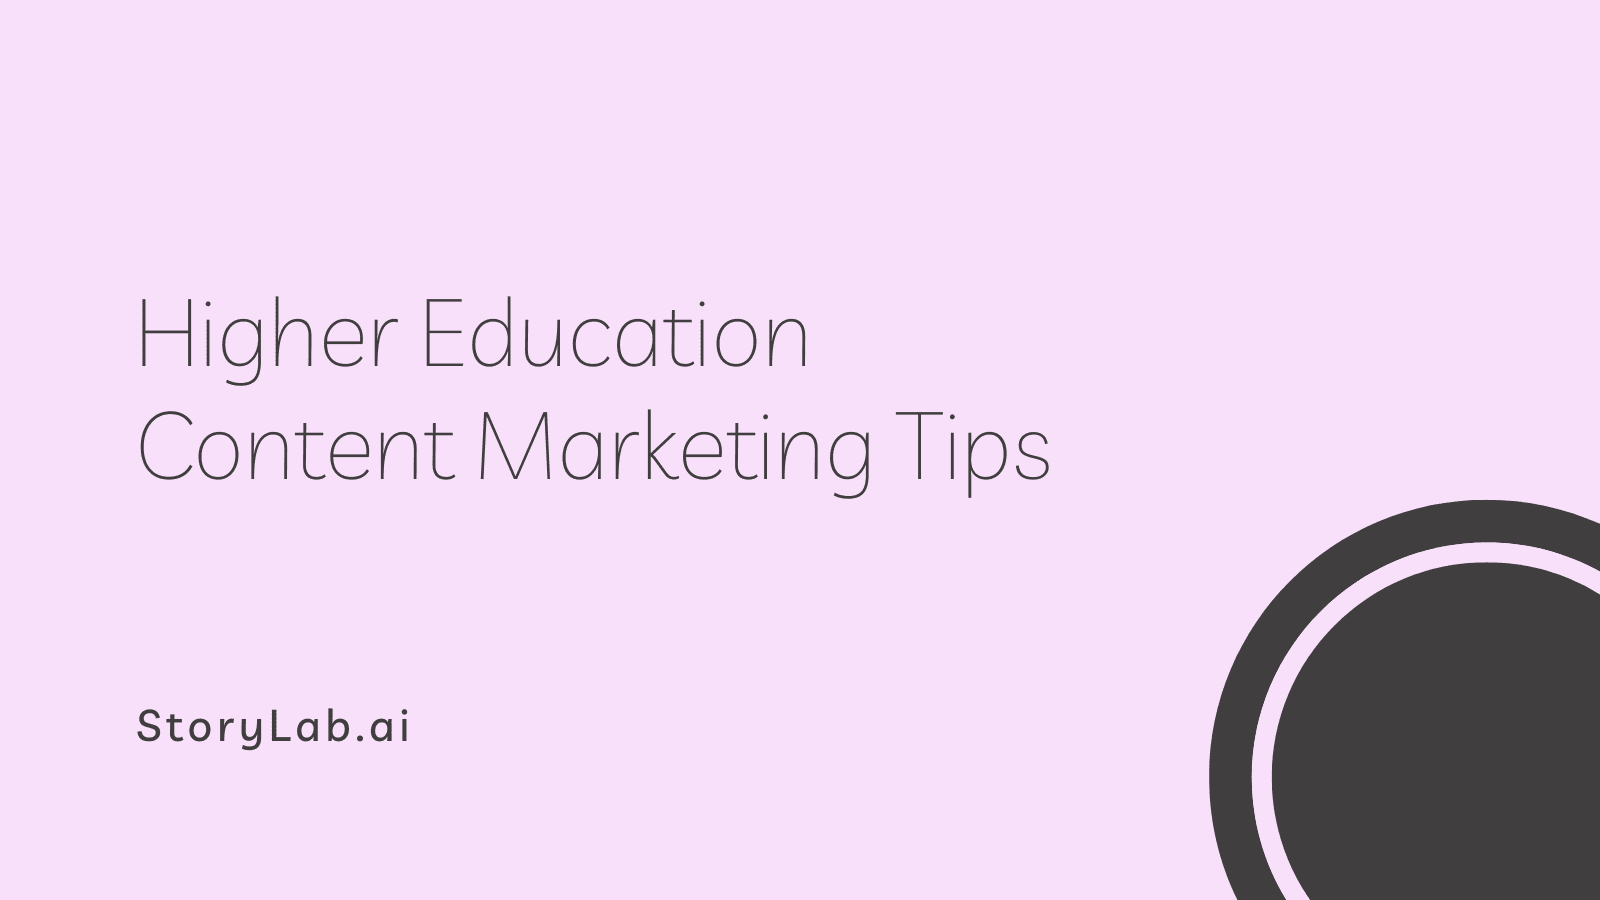 Higher Education Content Marketing Tips